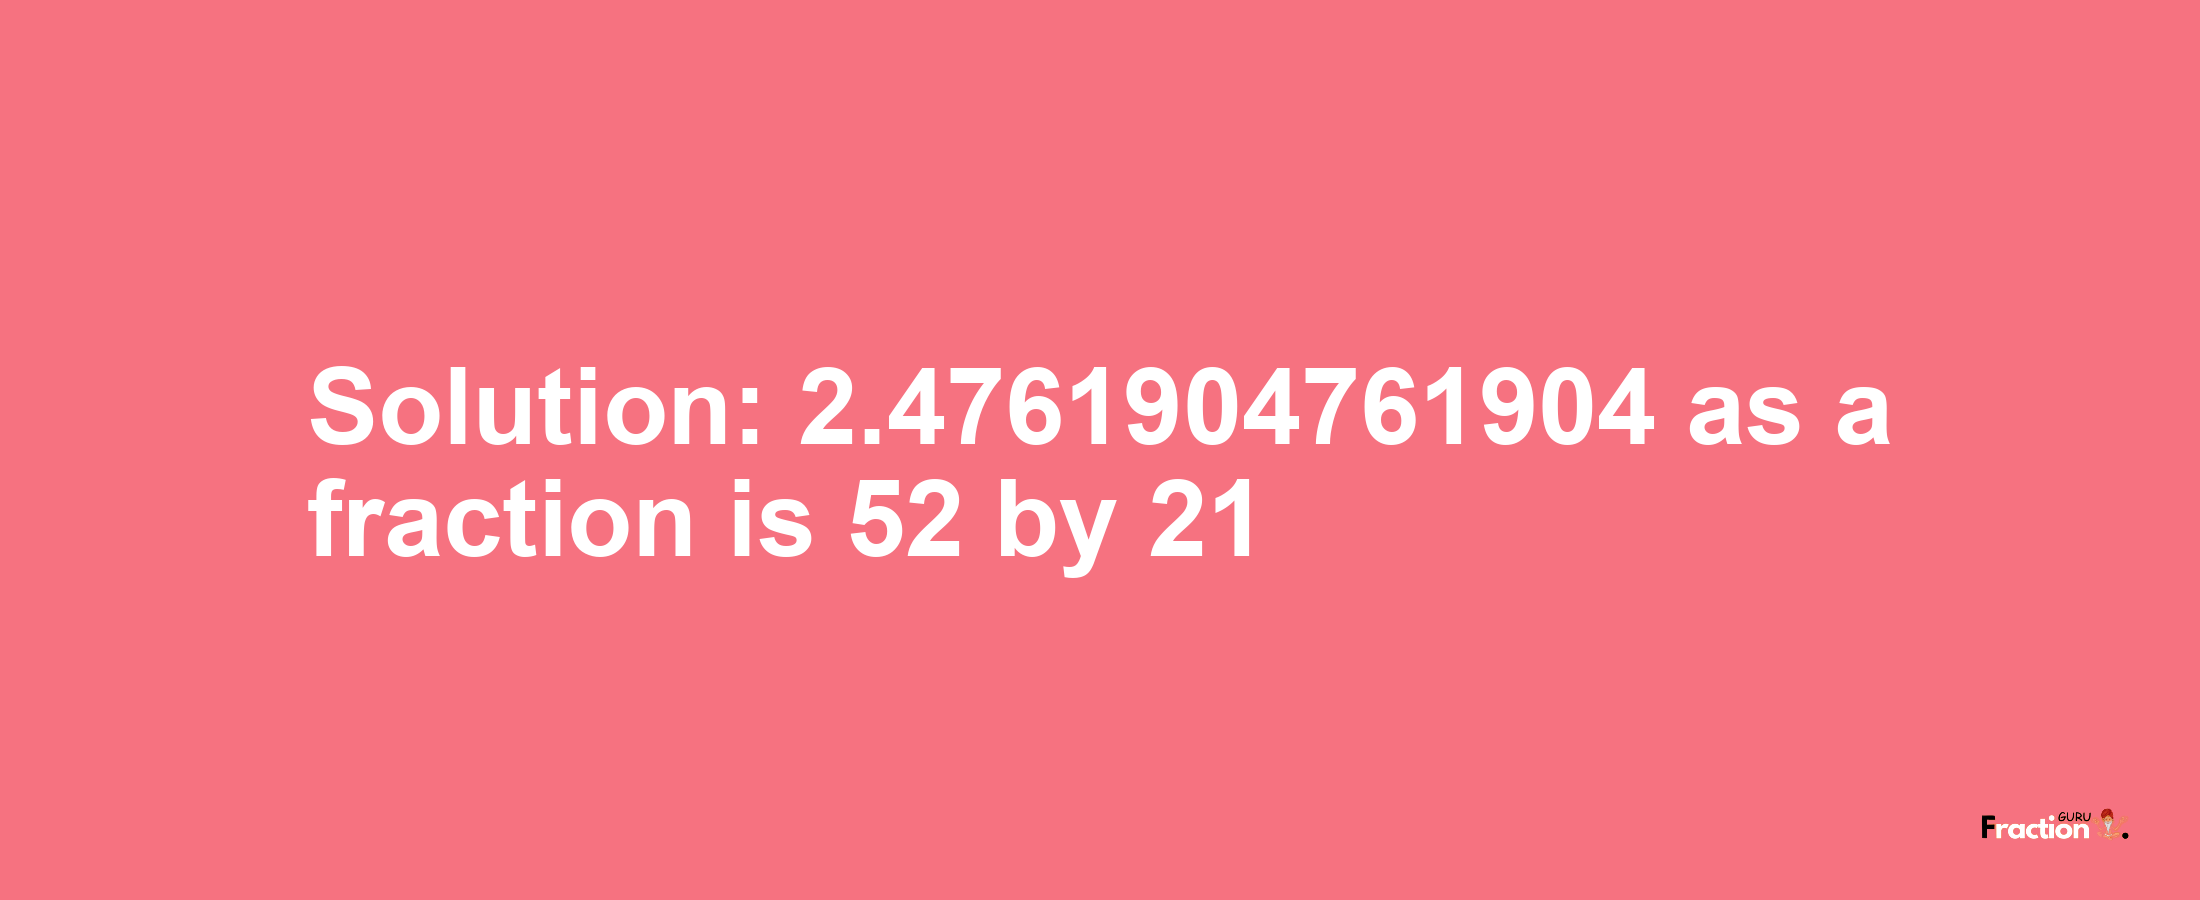 Solution:2.4761904761904 as a fraction is 52/21